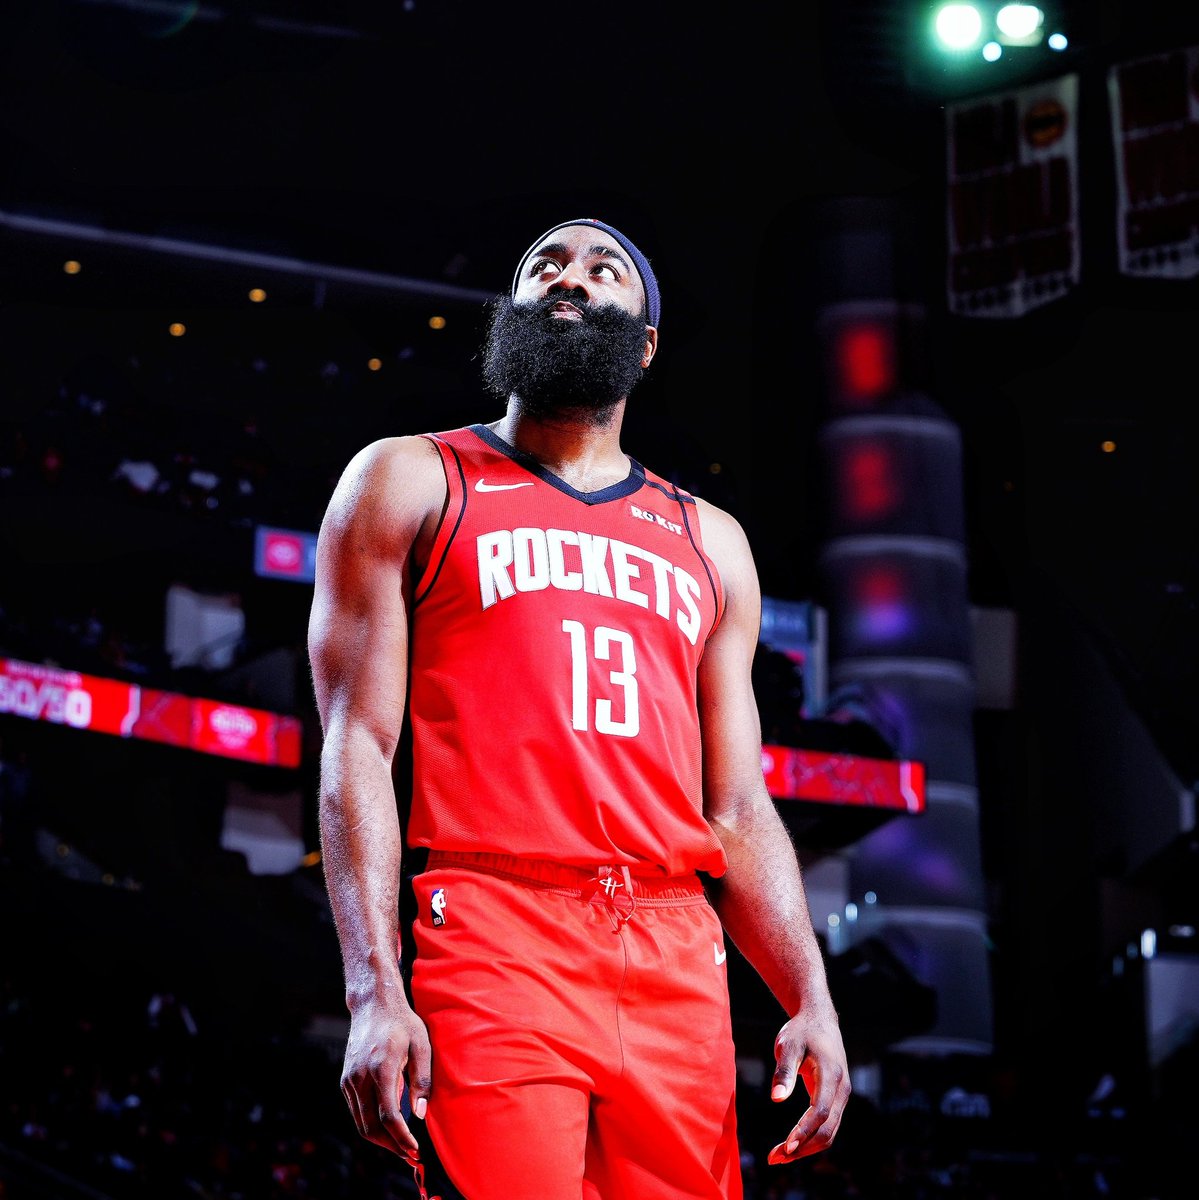 5: JAMES HARDEN- 34 Points, 6 Rebounds, 7 Assists- Rockets: 40-24 (6th in WC)- Probability to win MVP according to basketball-reference: 10.5% (3rd)